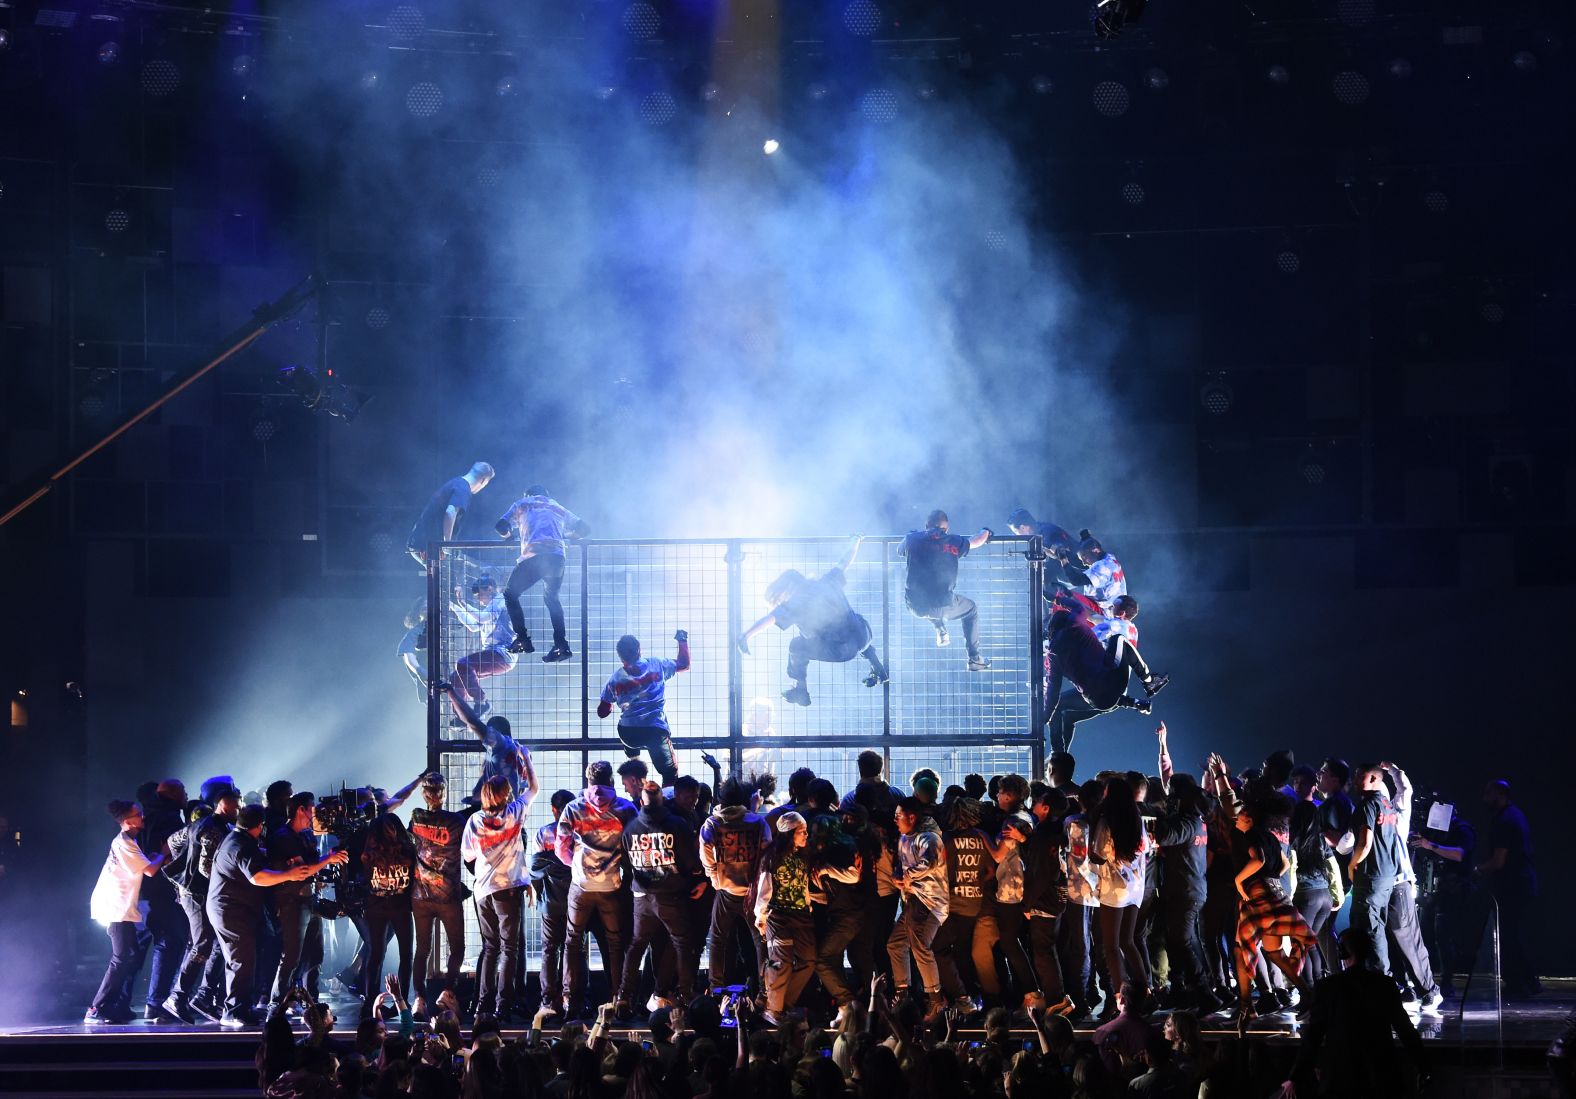 Performers climb a cage that Travis Scott <a href="https://www.cnn.com/entertainment/live-news/grammys-2019/h_10c433737897cbc453a9562e79823b17" target="_blank">was rapping behind.</a>